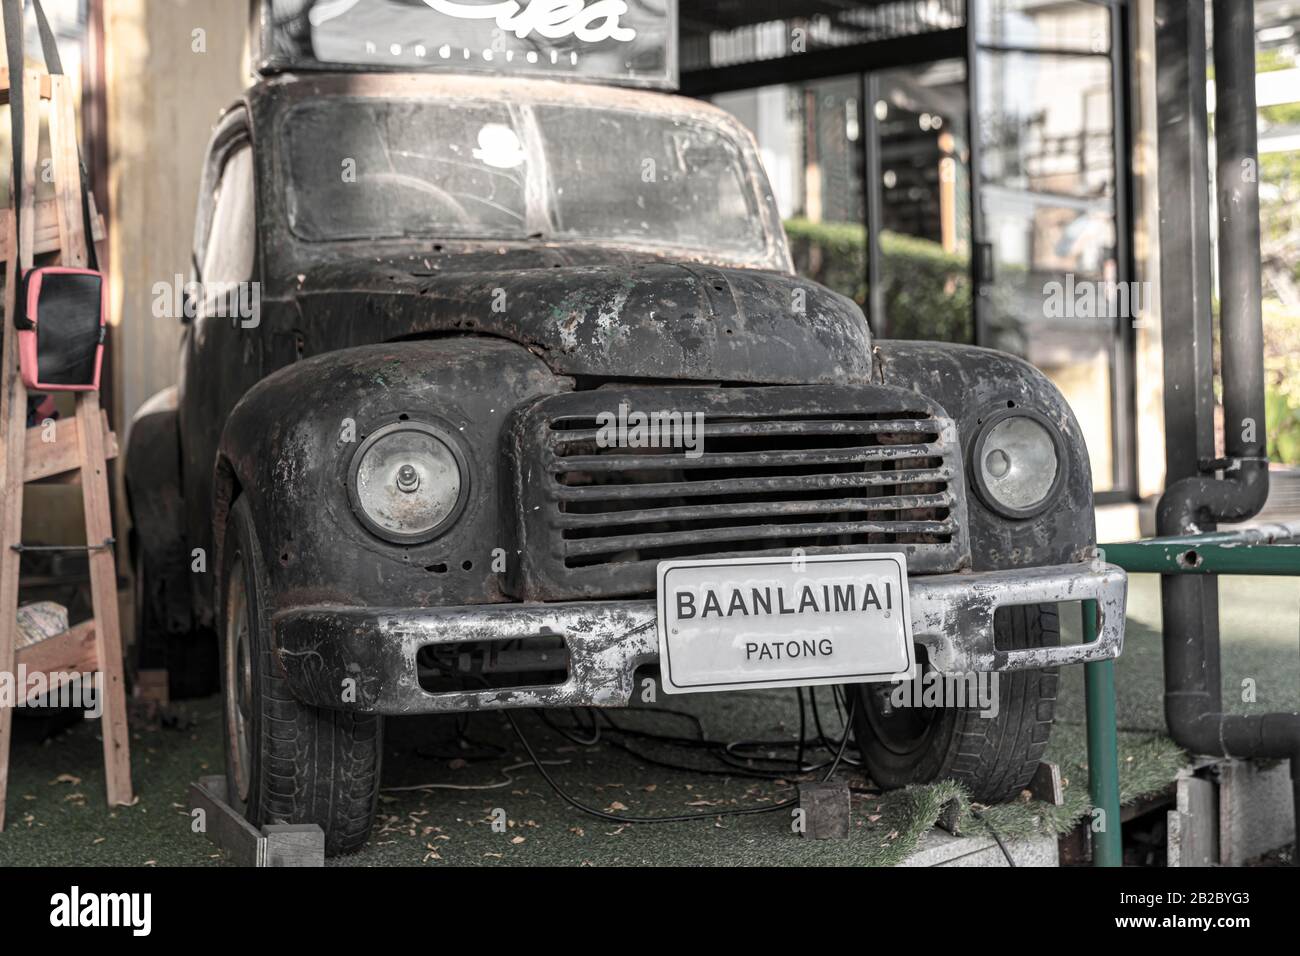 Patong, Phuket Thailand, January 5, 2020: Patong, Phuket Thailand, January 5, 2020: old rusty pickup truck used in cafes for advertising as part of th Stock Photo